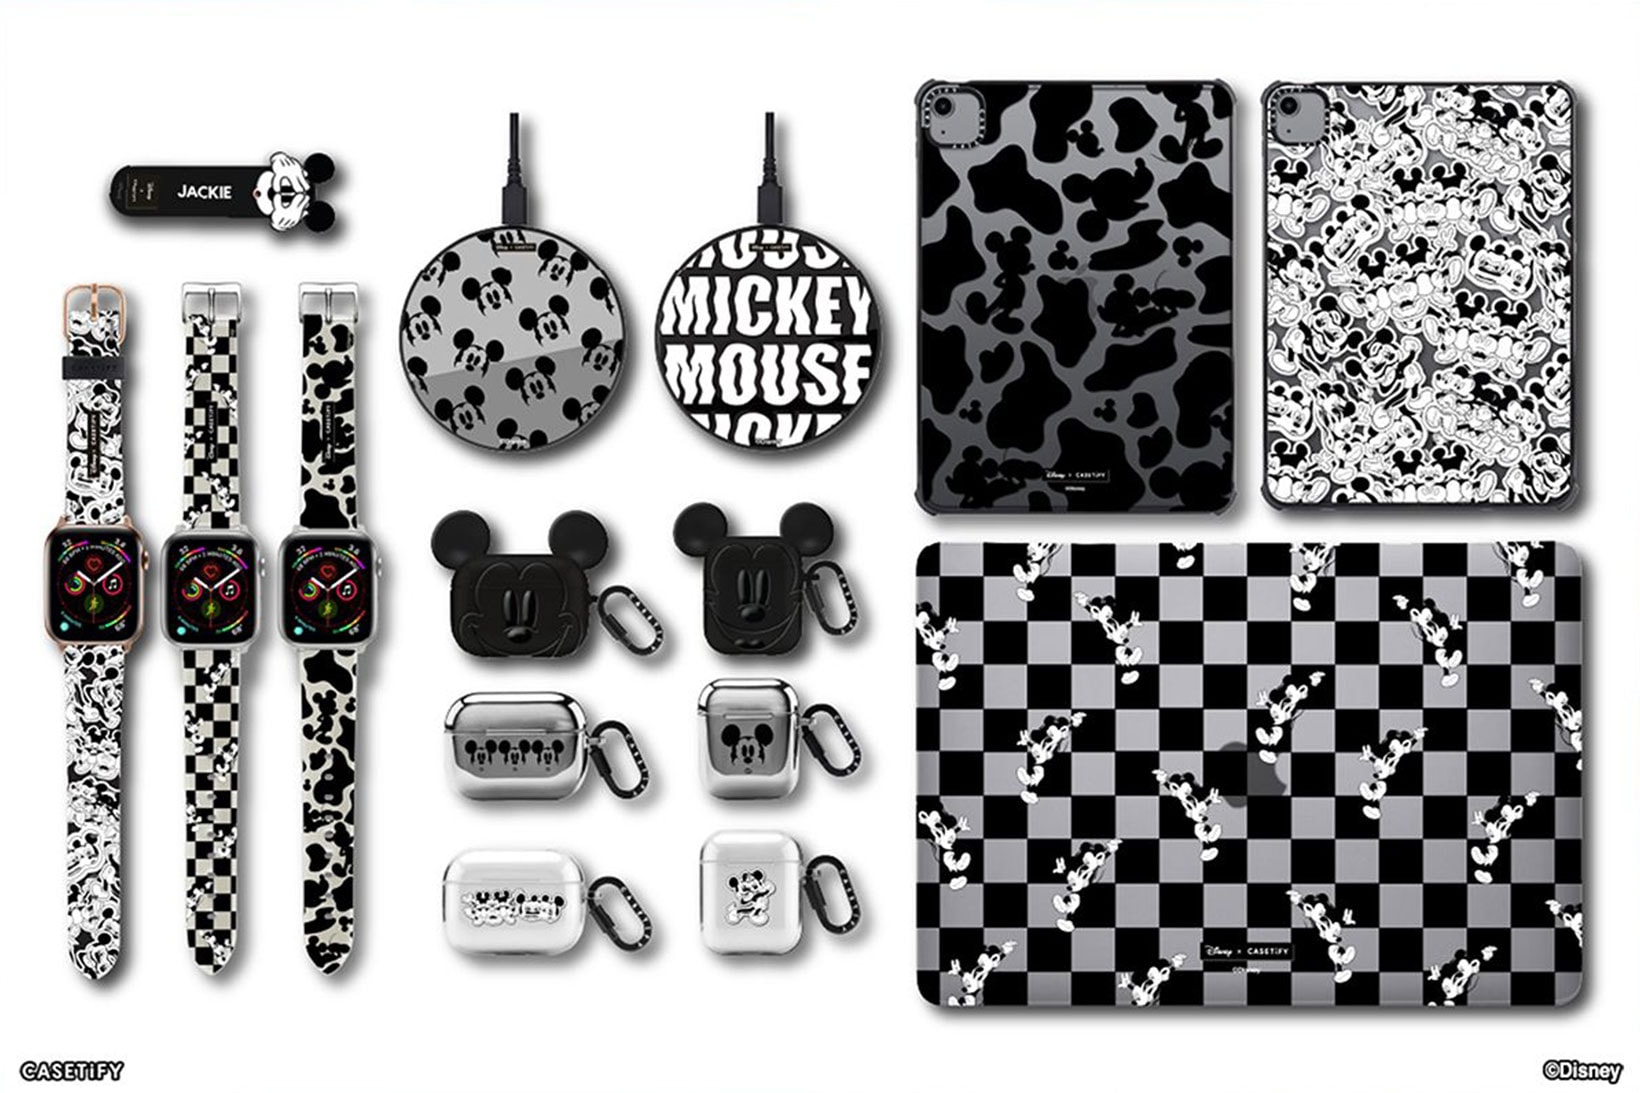 disney casetify mickey mouse collaboration iphone cases apple watch bands straps wireless chargers airpods